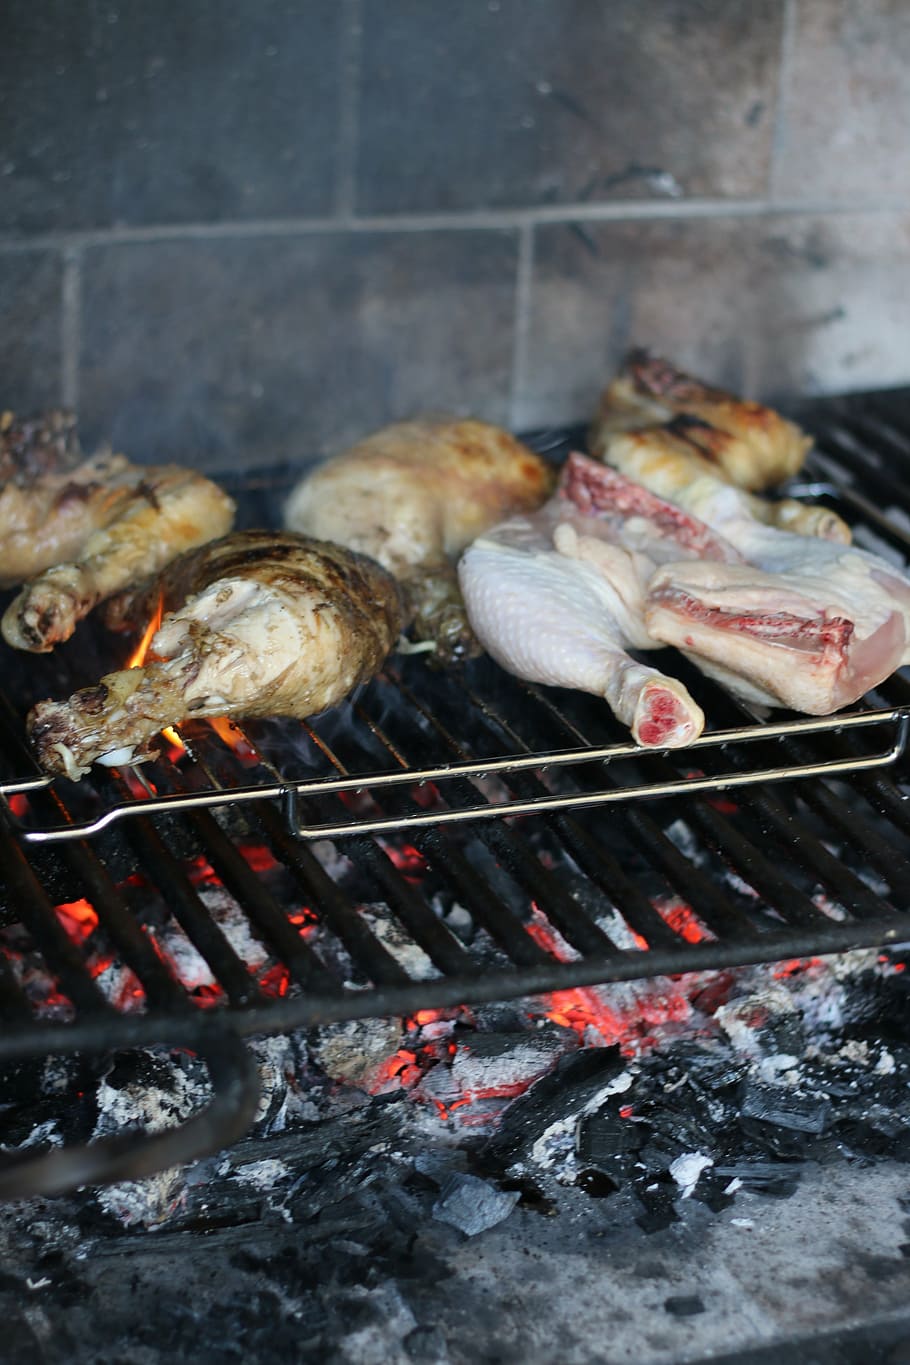 rustic, stone bbq, food, fire, charcoal, dinner, chicken legs, barbecue, food and drink, barbecue grill